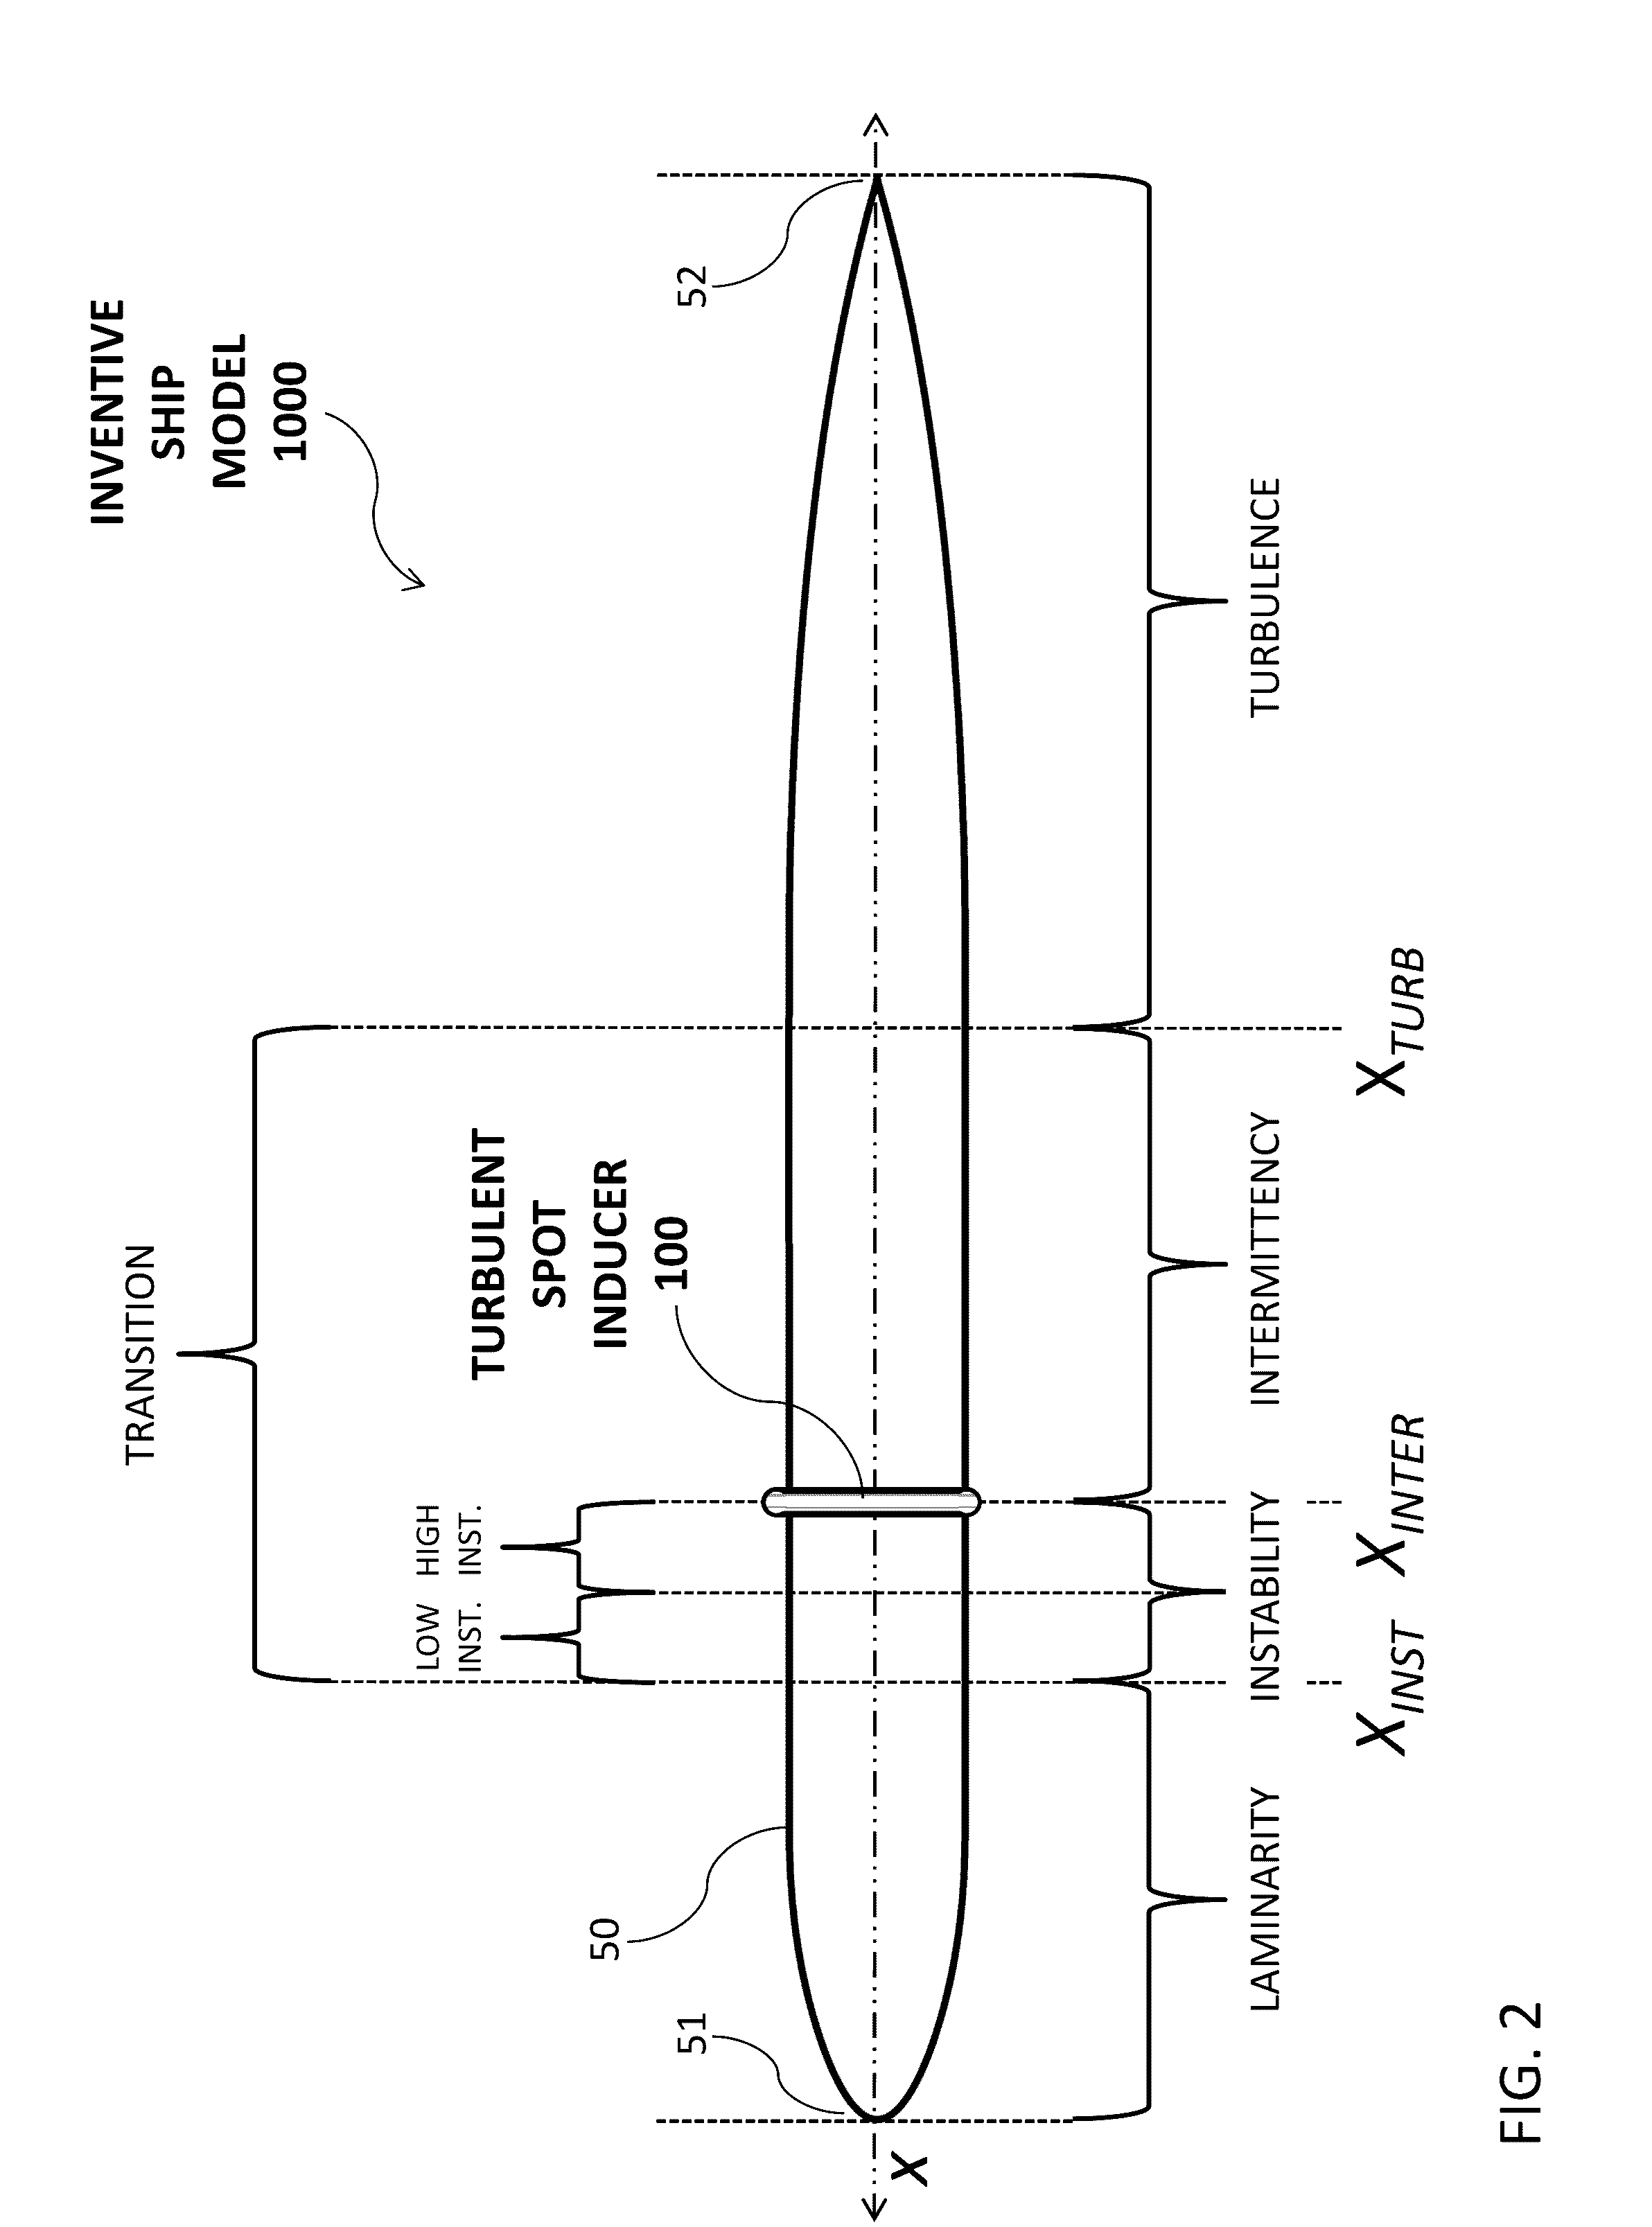 Ship resistance prediction using a turbulent spot inducer in model testing